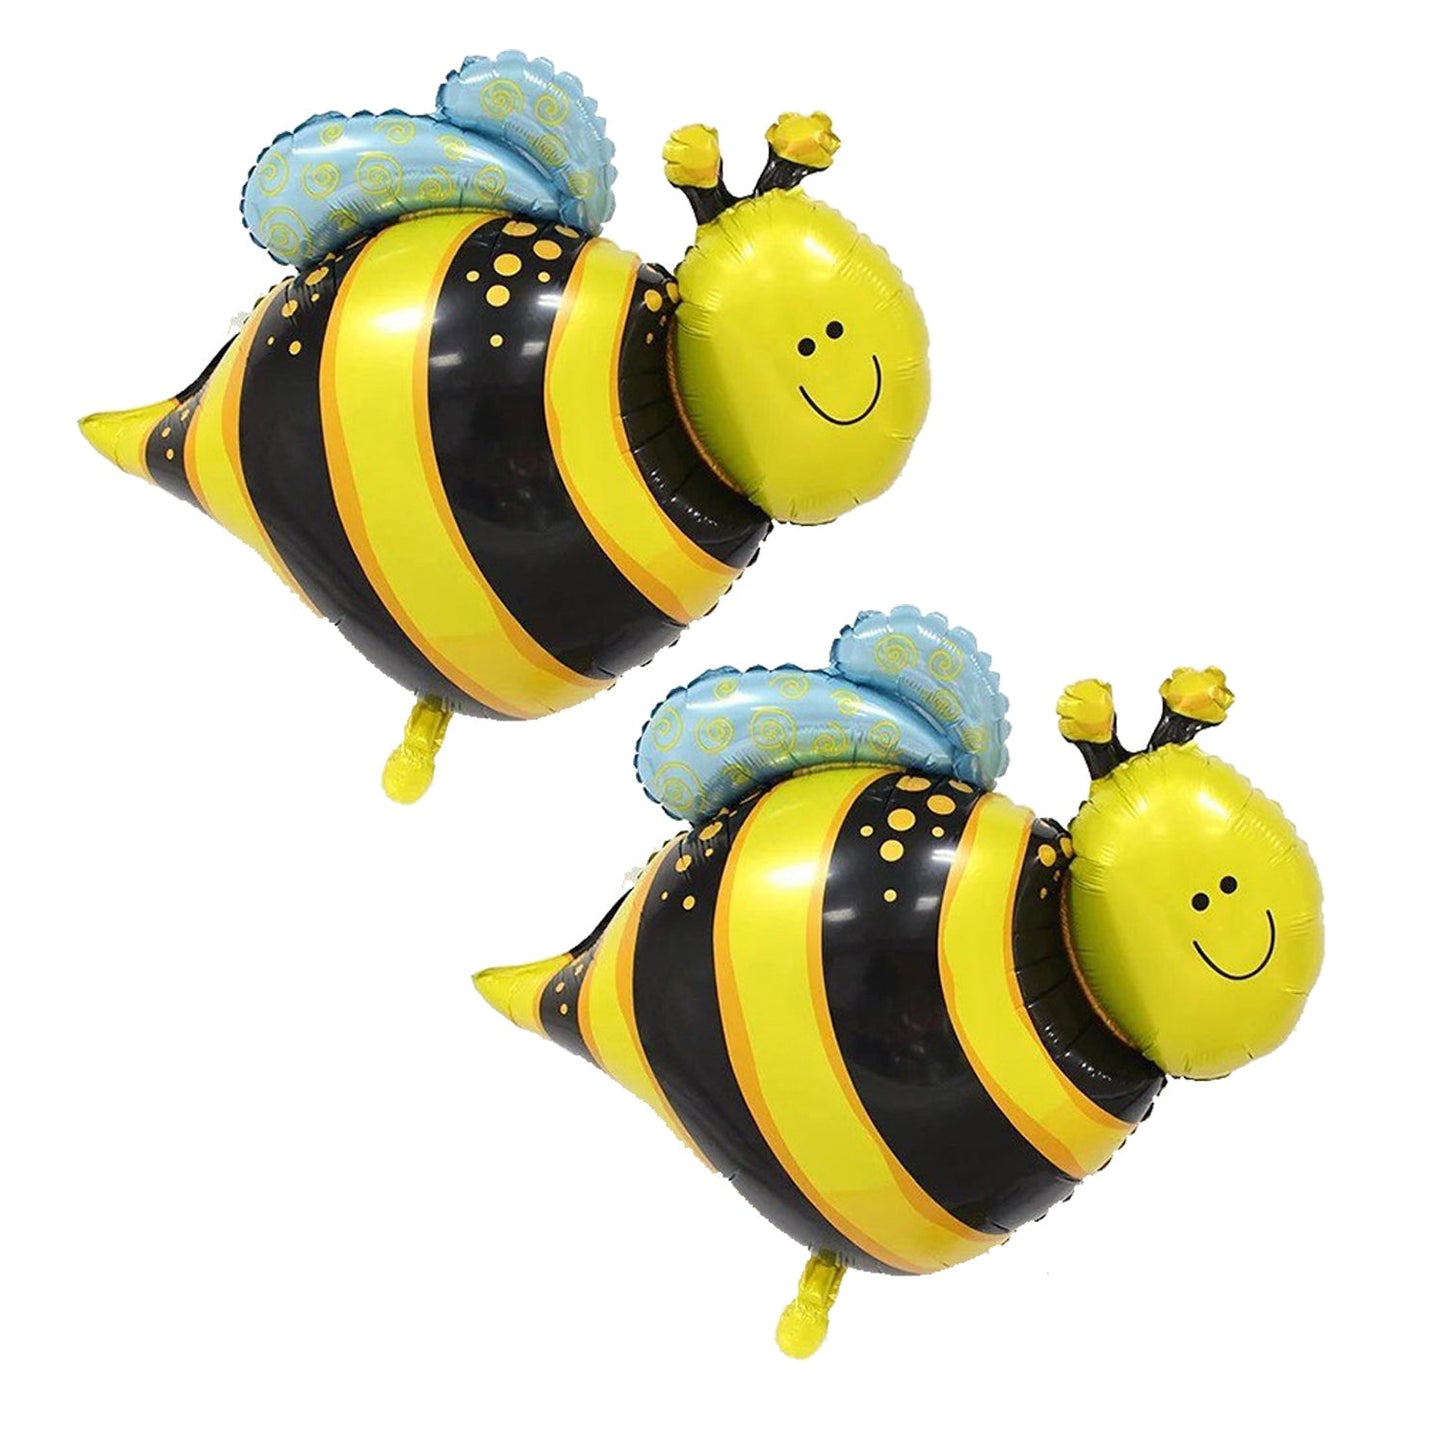 Bumble Bee First Birthday Balloons Honey Party Decoration Set of 2 -balloons-bee